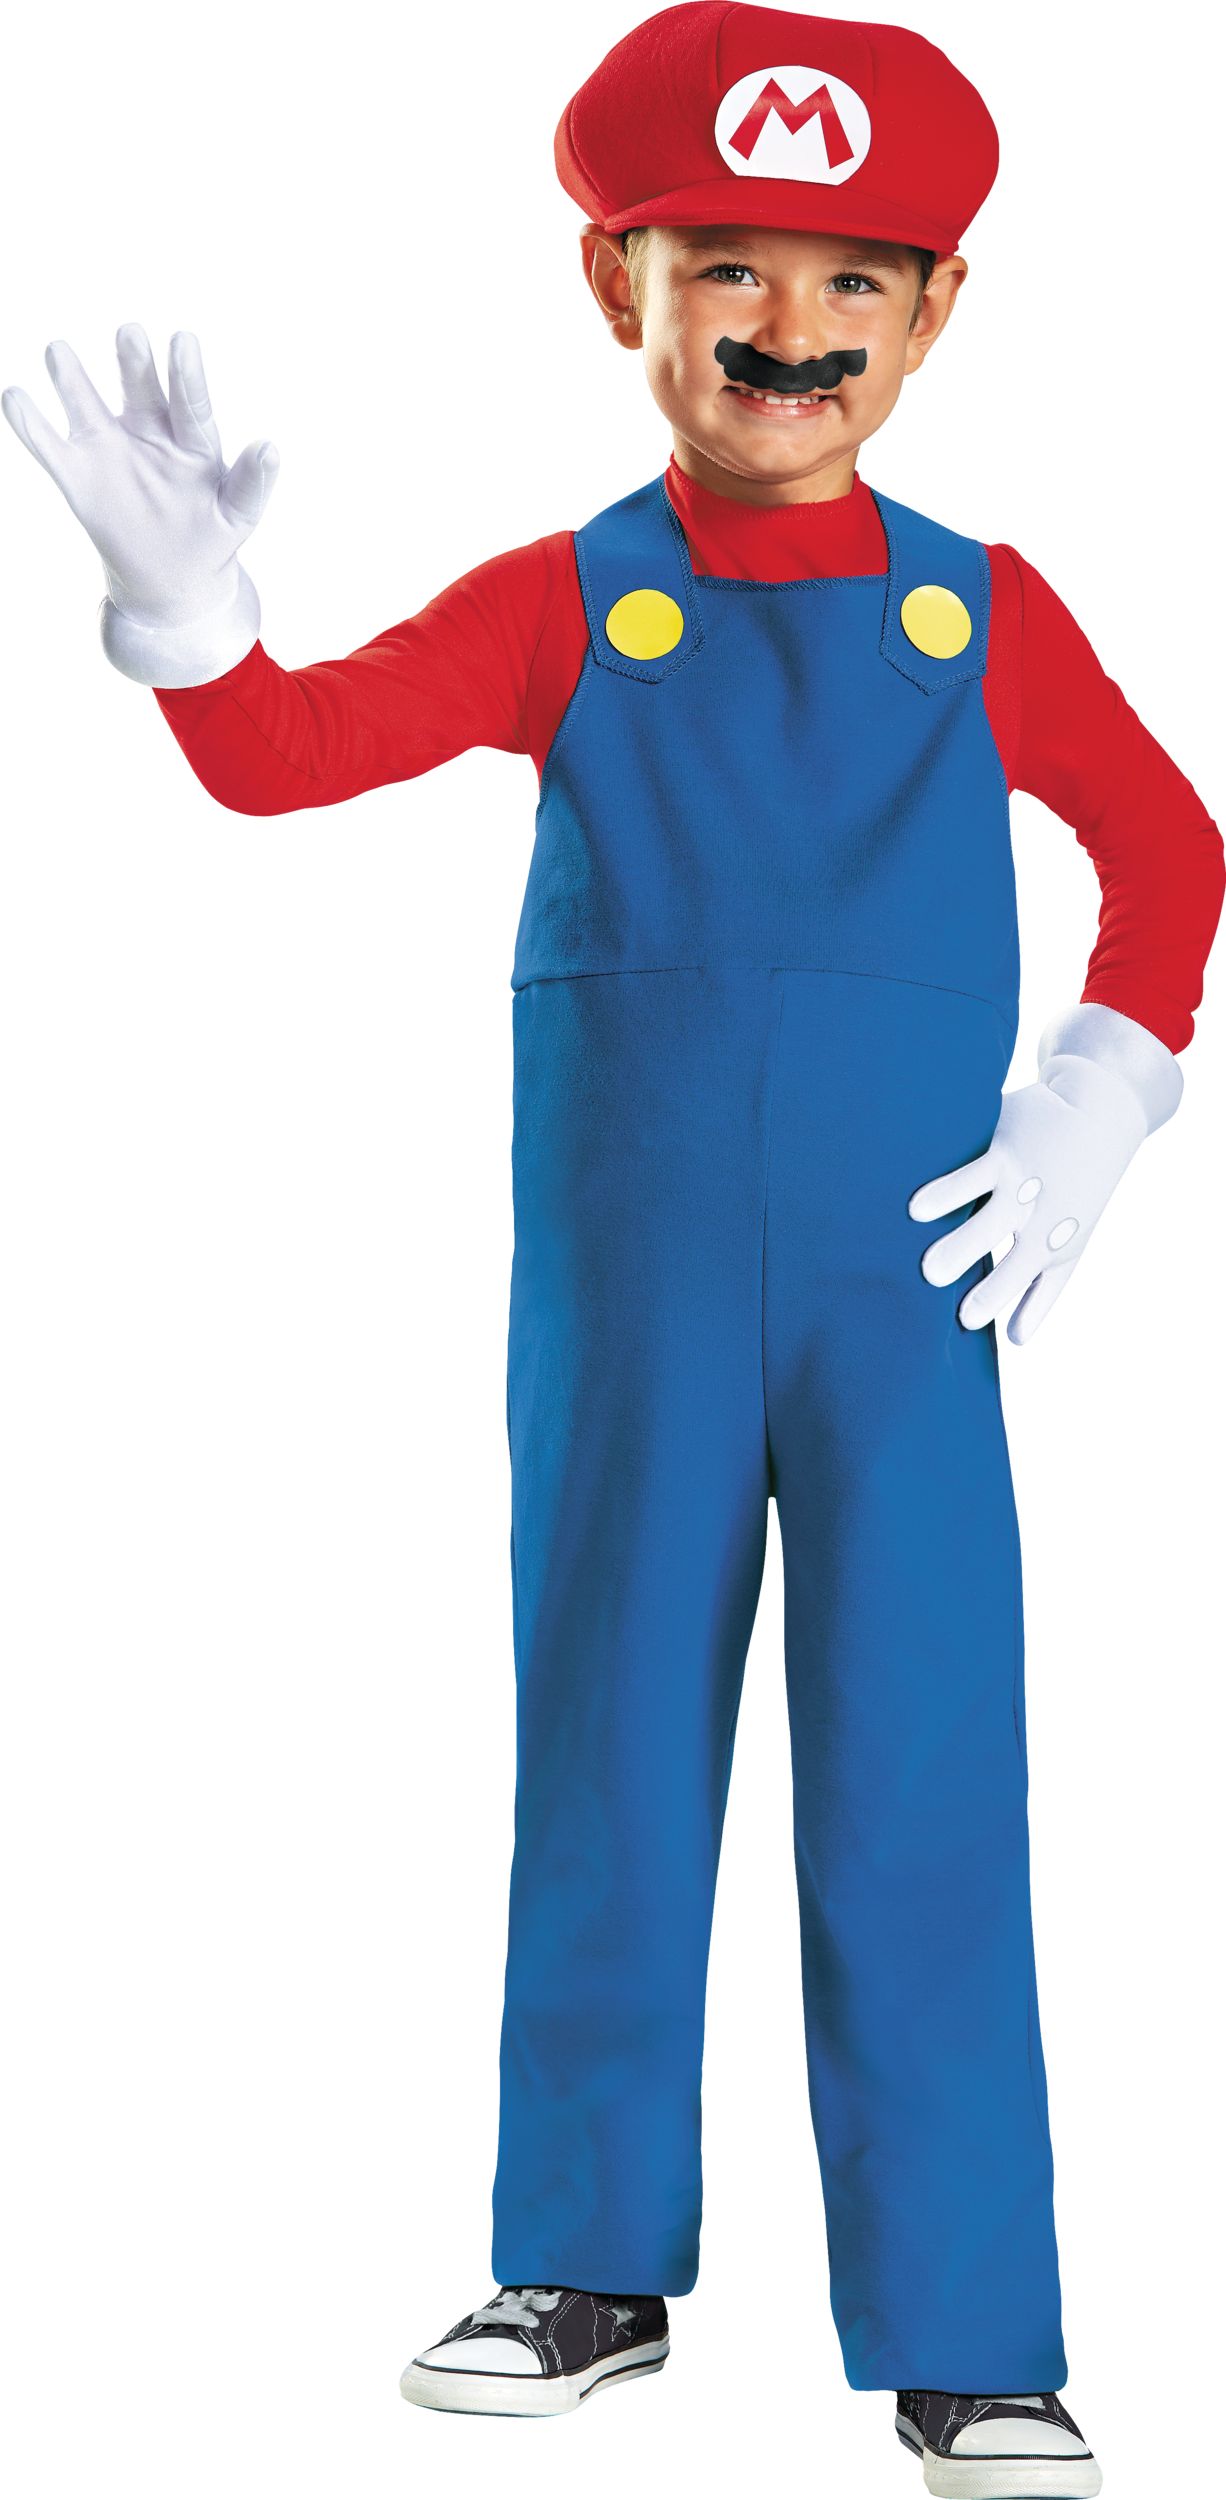 Super Mario Brothers Child Mario Costume, Blue/Red, More Options Available